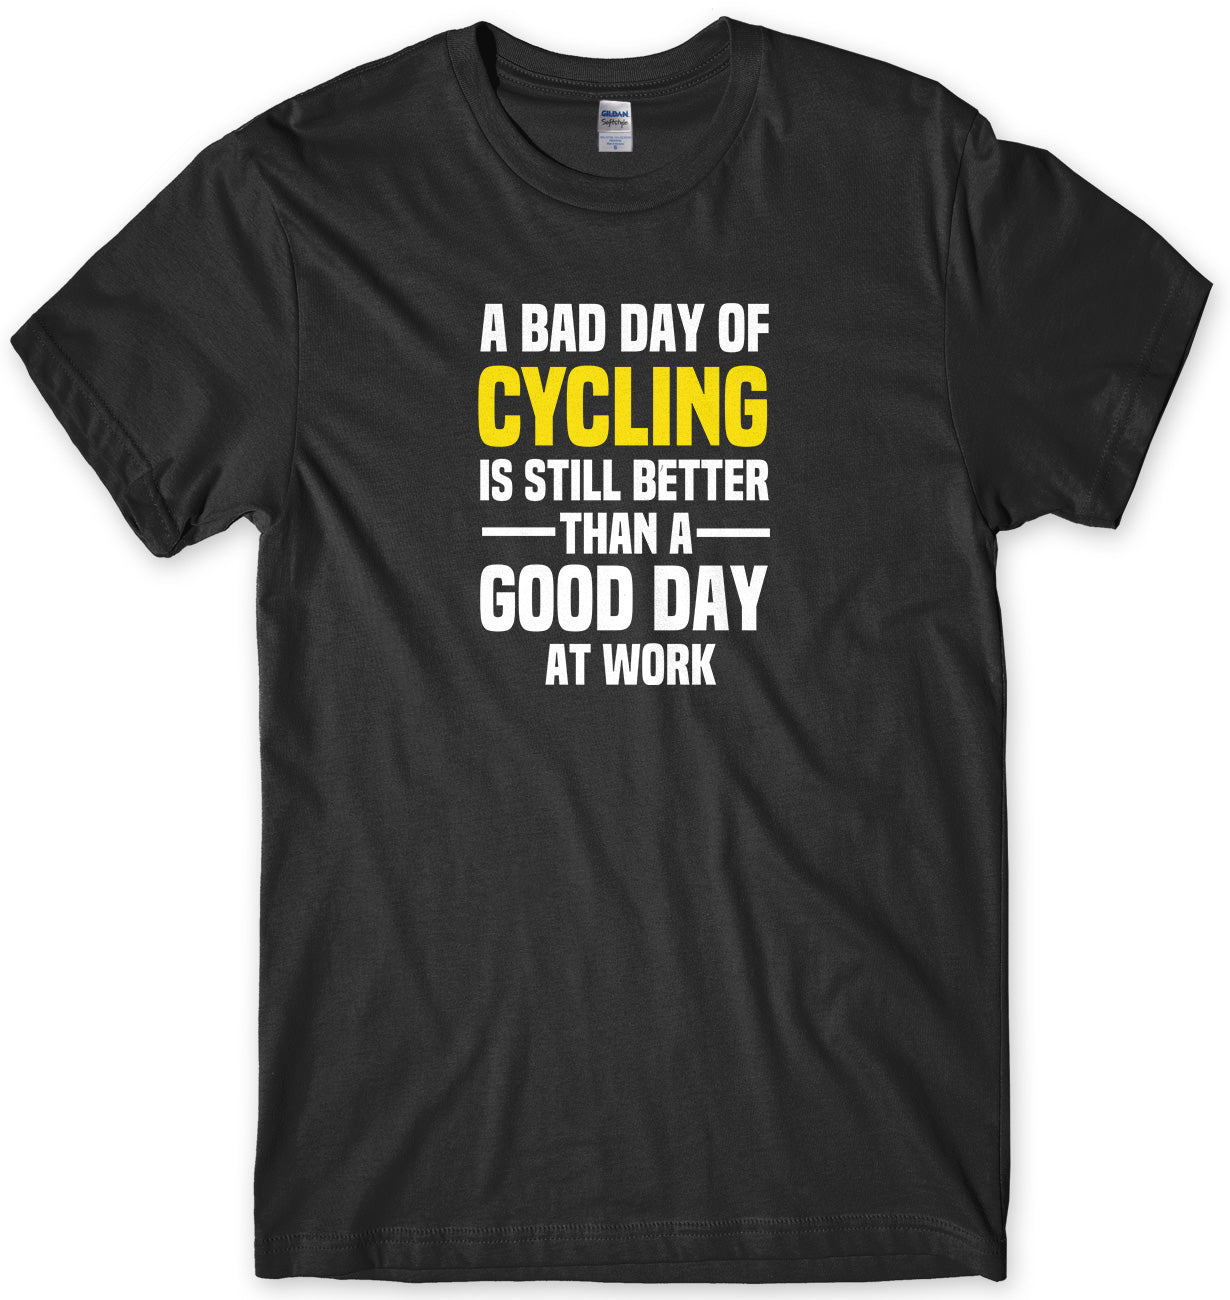 A BAD DAY OF CYCLING IS STILL BETTER THAN A GOOD DAY AT WORK MENS FUNNY SLOGAN UNISEX T-SHIRT - StreetSide Surgeons